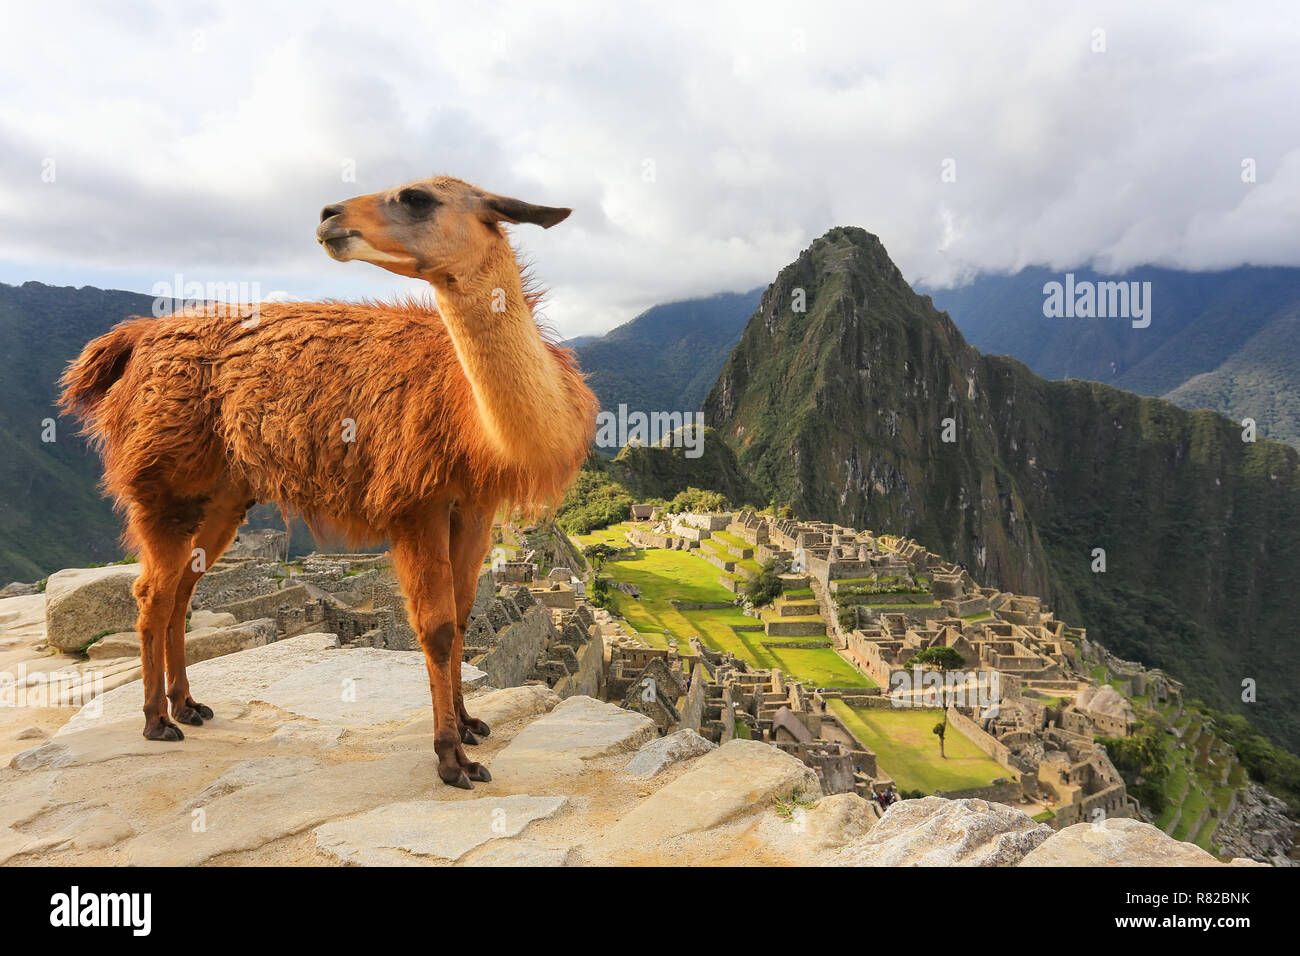 Llama standing at Machu Picchu overlook in Peru. In 2007 Machu Picchu was voted one of the New Seven Wonders of the World. Stock Photo